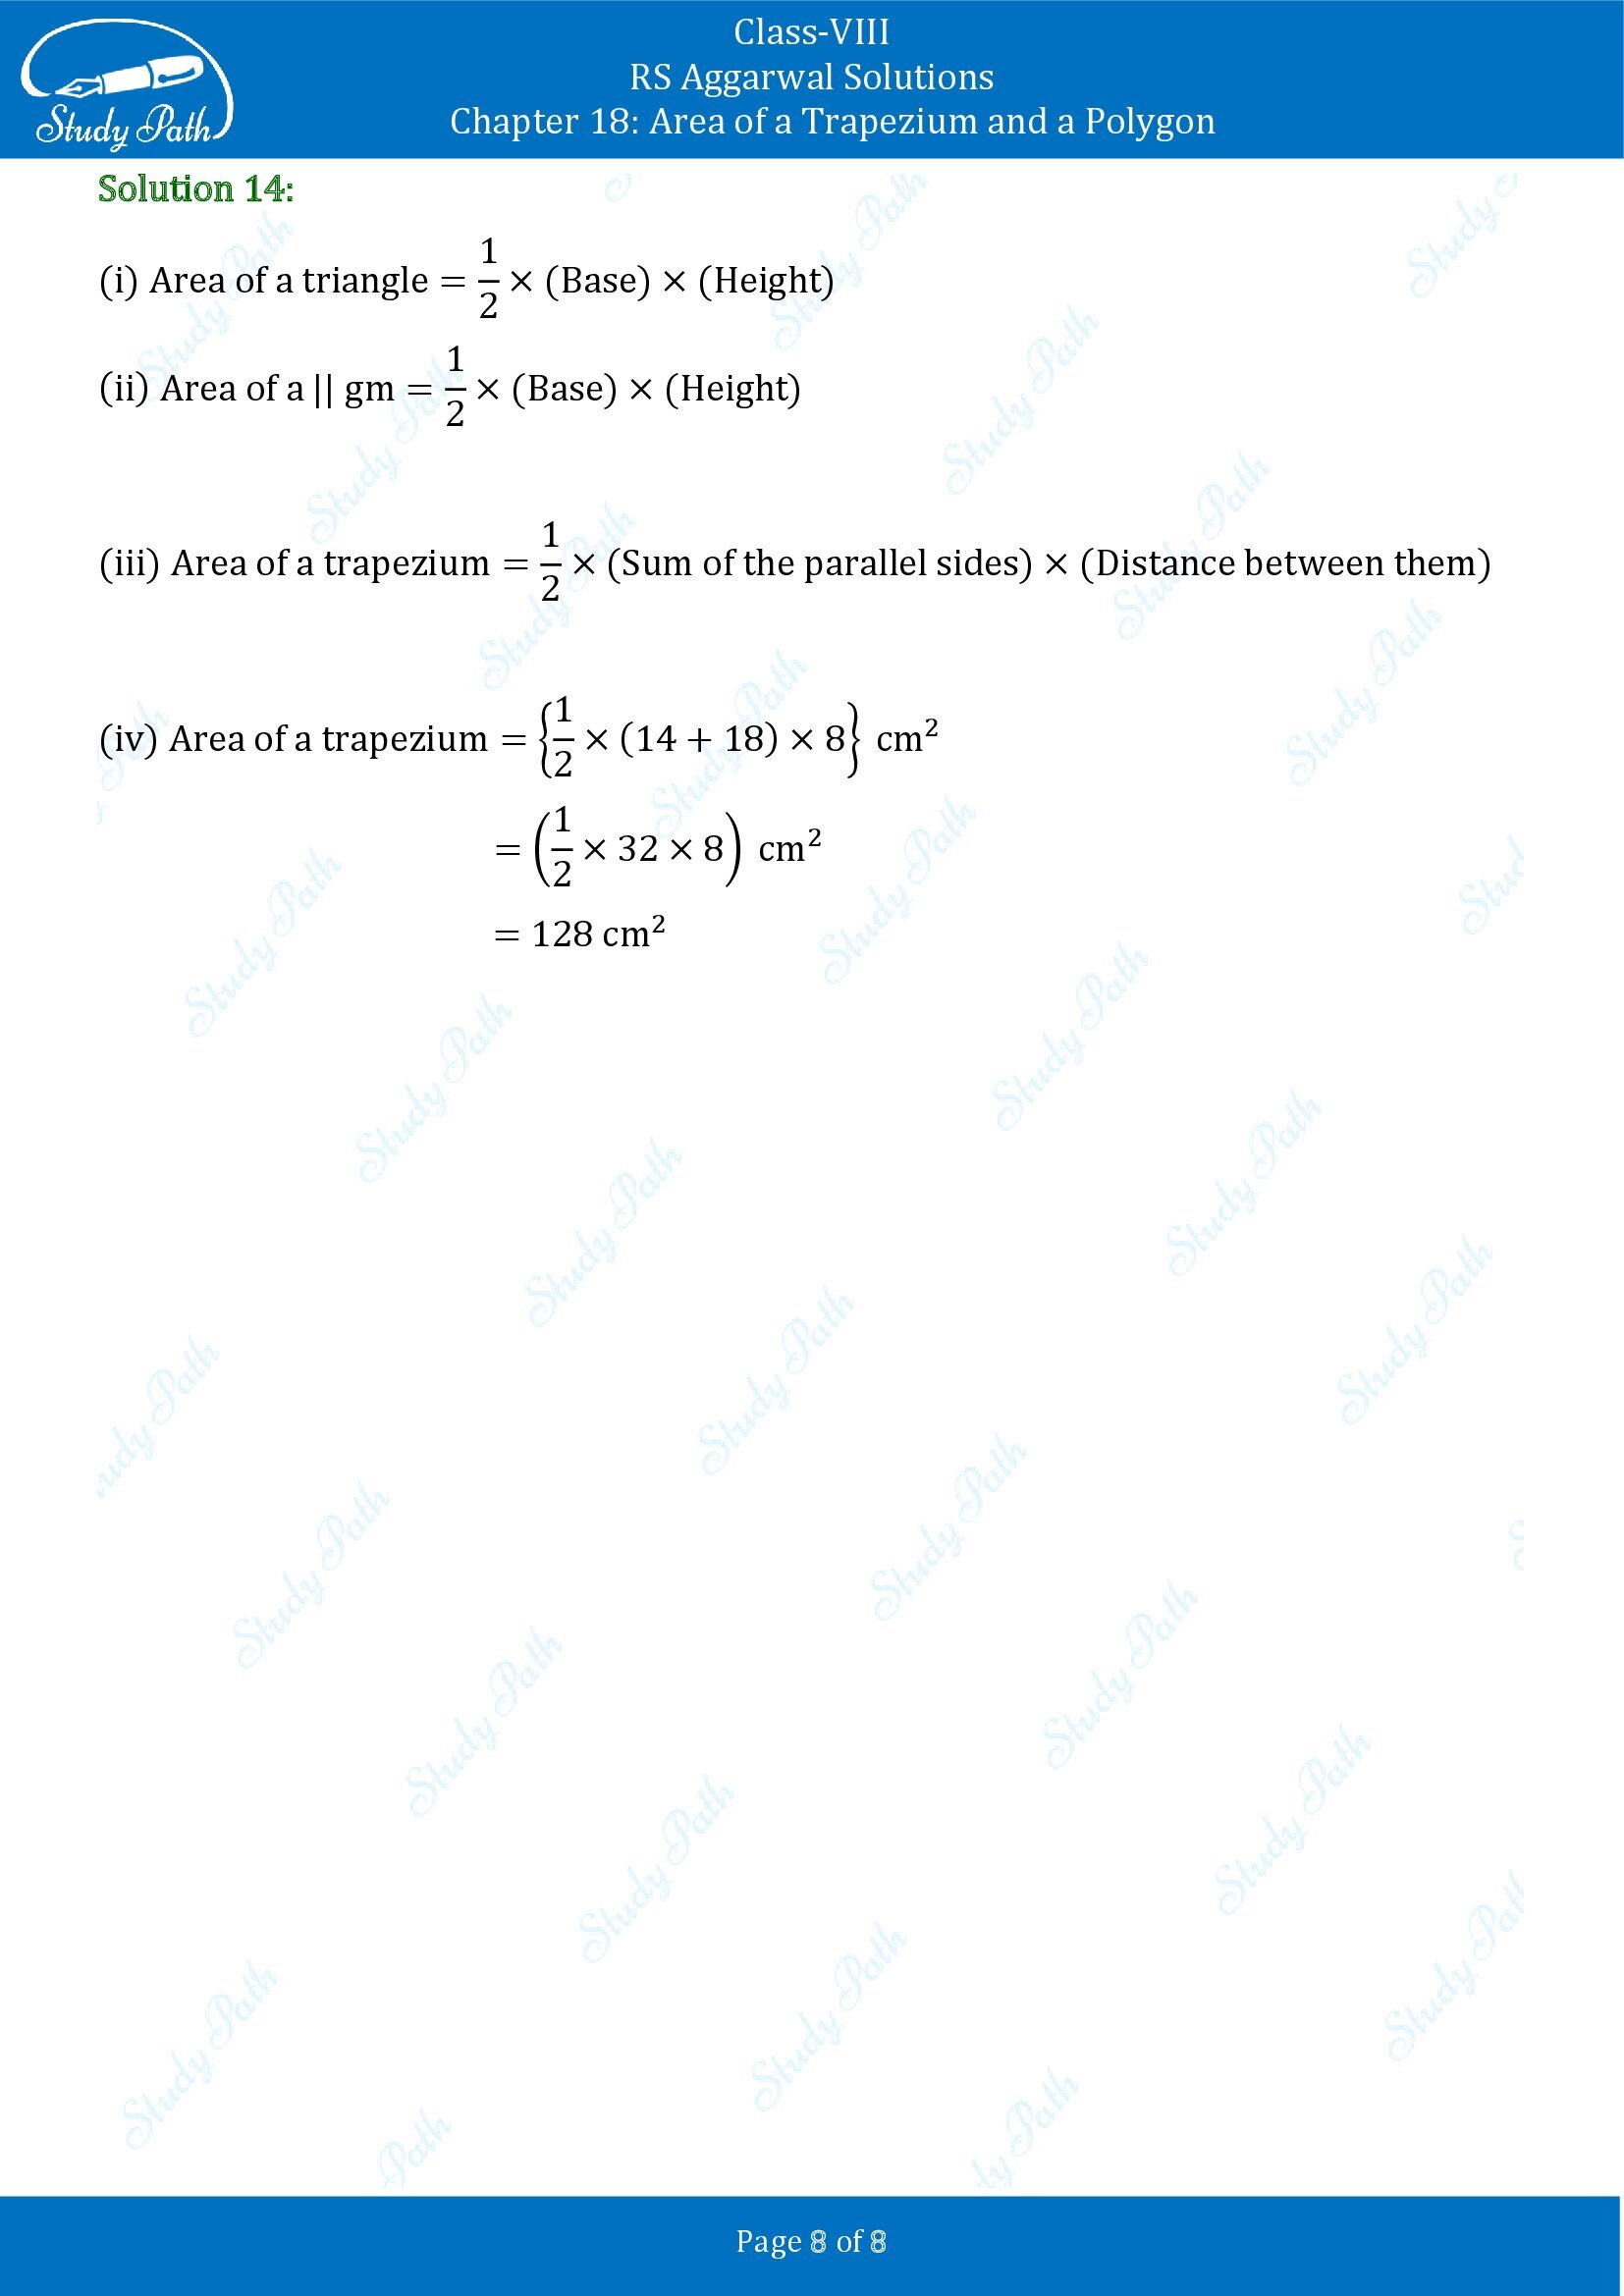 RS Aggarwal Solutions Class 8 Chapter 18 Area of a Trapezium and a Polygon Test Paper 00008